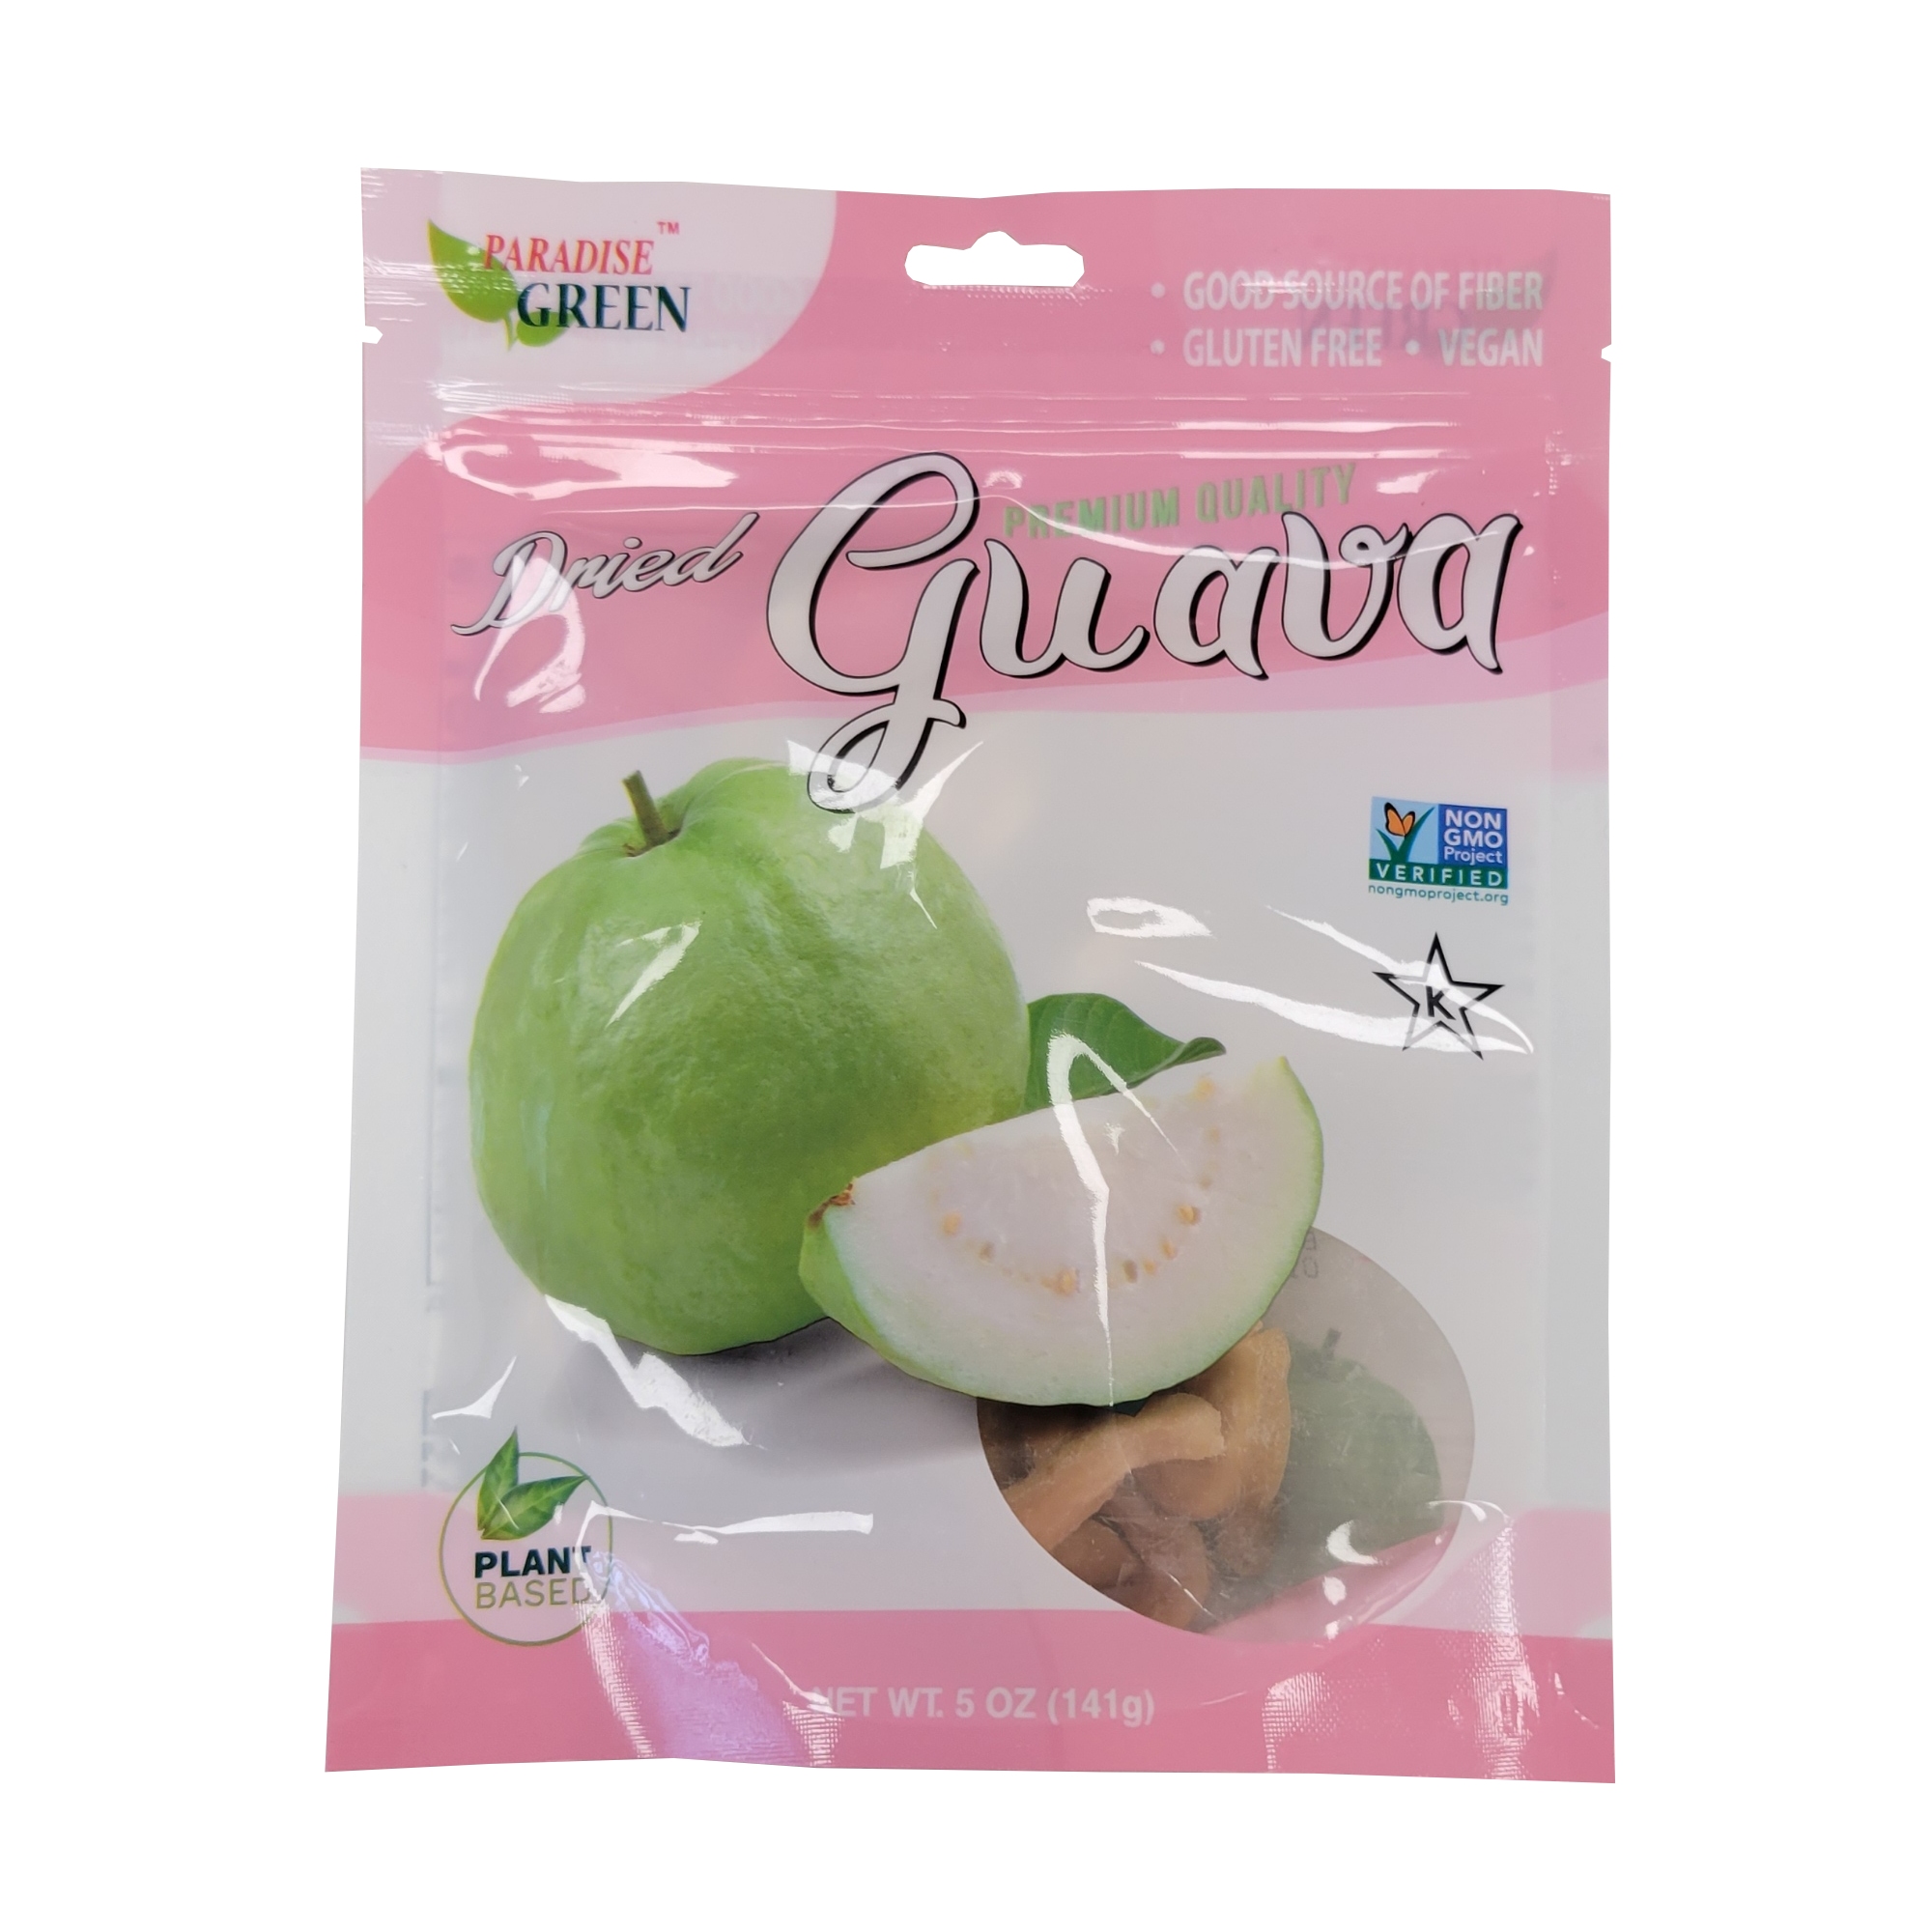 PG DRIED GUAVA SN250502